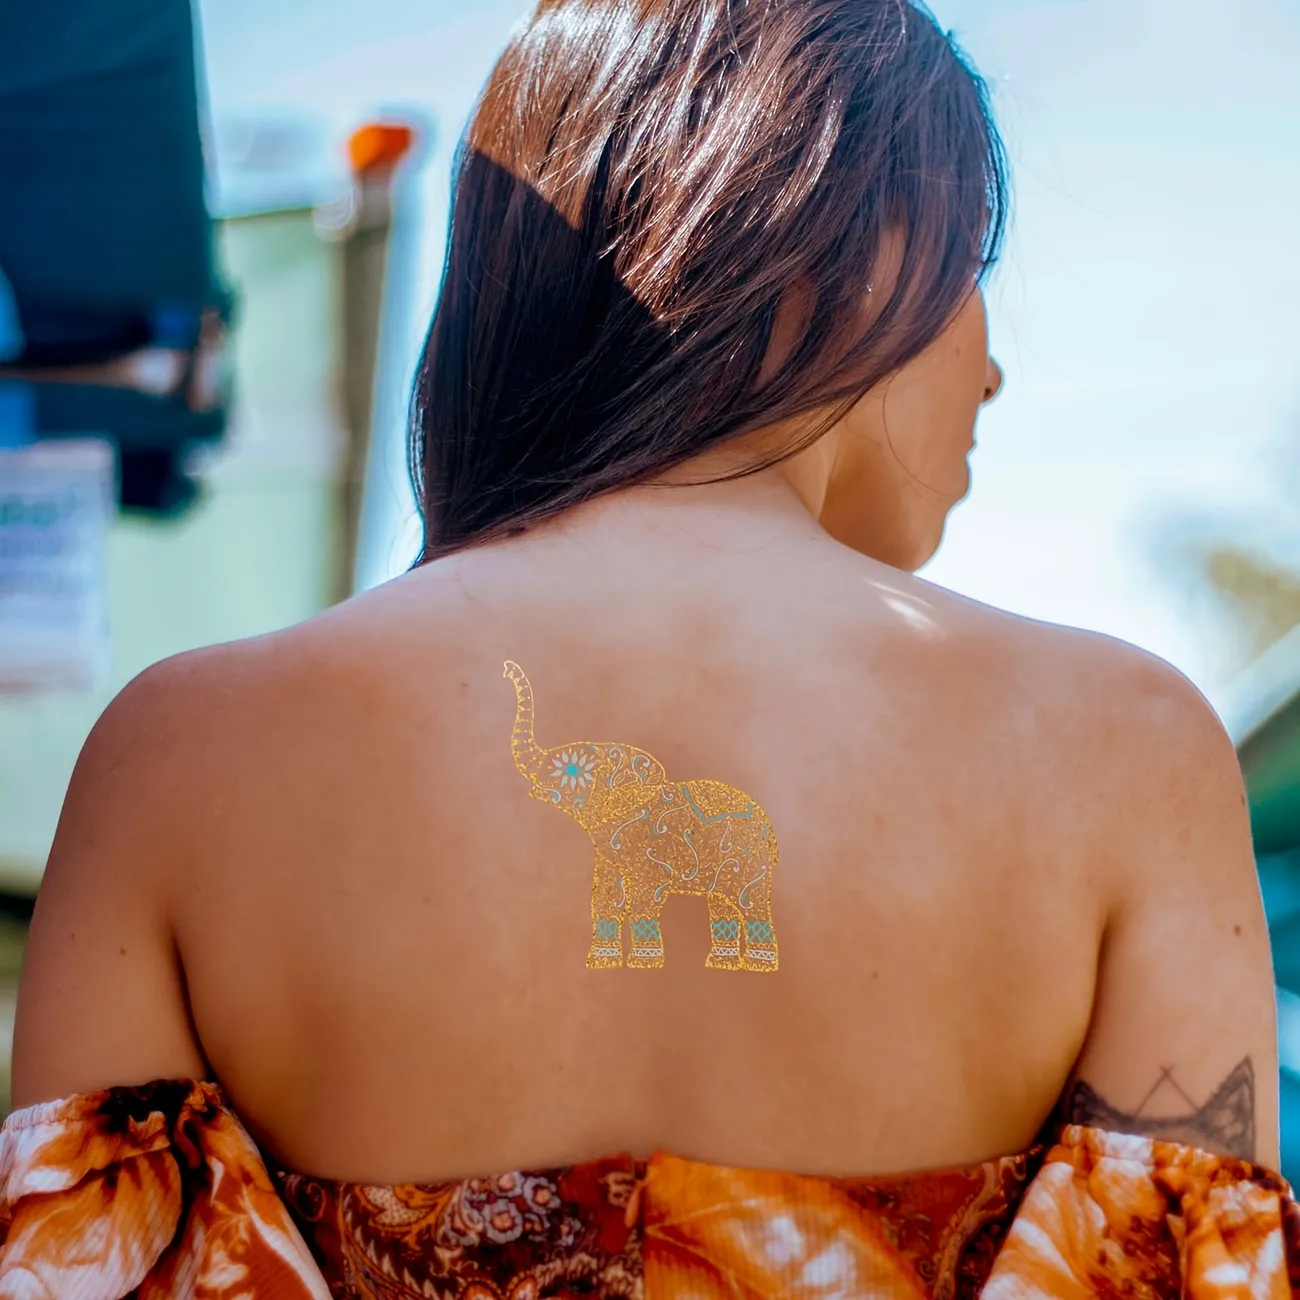 Metallic Temporary Tattoo Gold Silver Colorful Butterfly Bird And Elephants Floral Pattern Fake Tattoos Flash Jewelry Tattoos Waterproof And Long Lasting Boho Style Tattoos For Women And Girls - Beauty & Health -